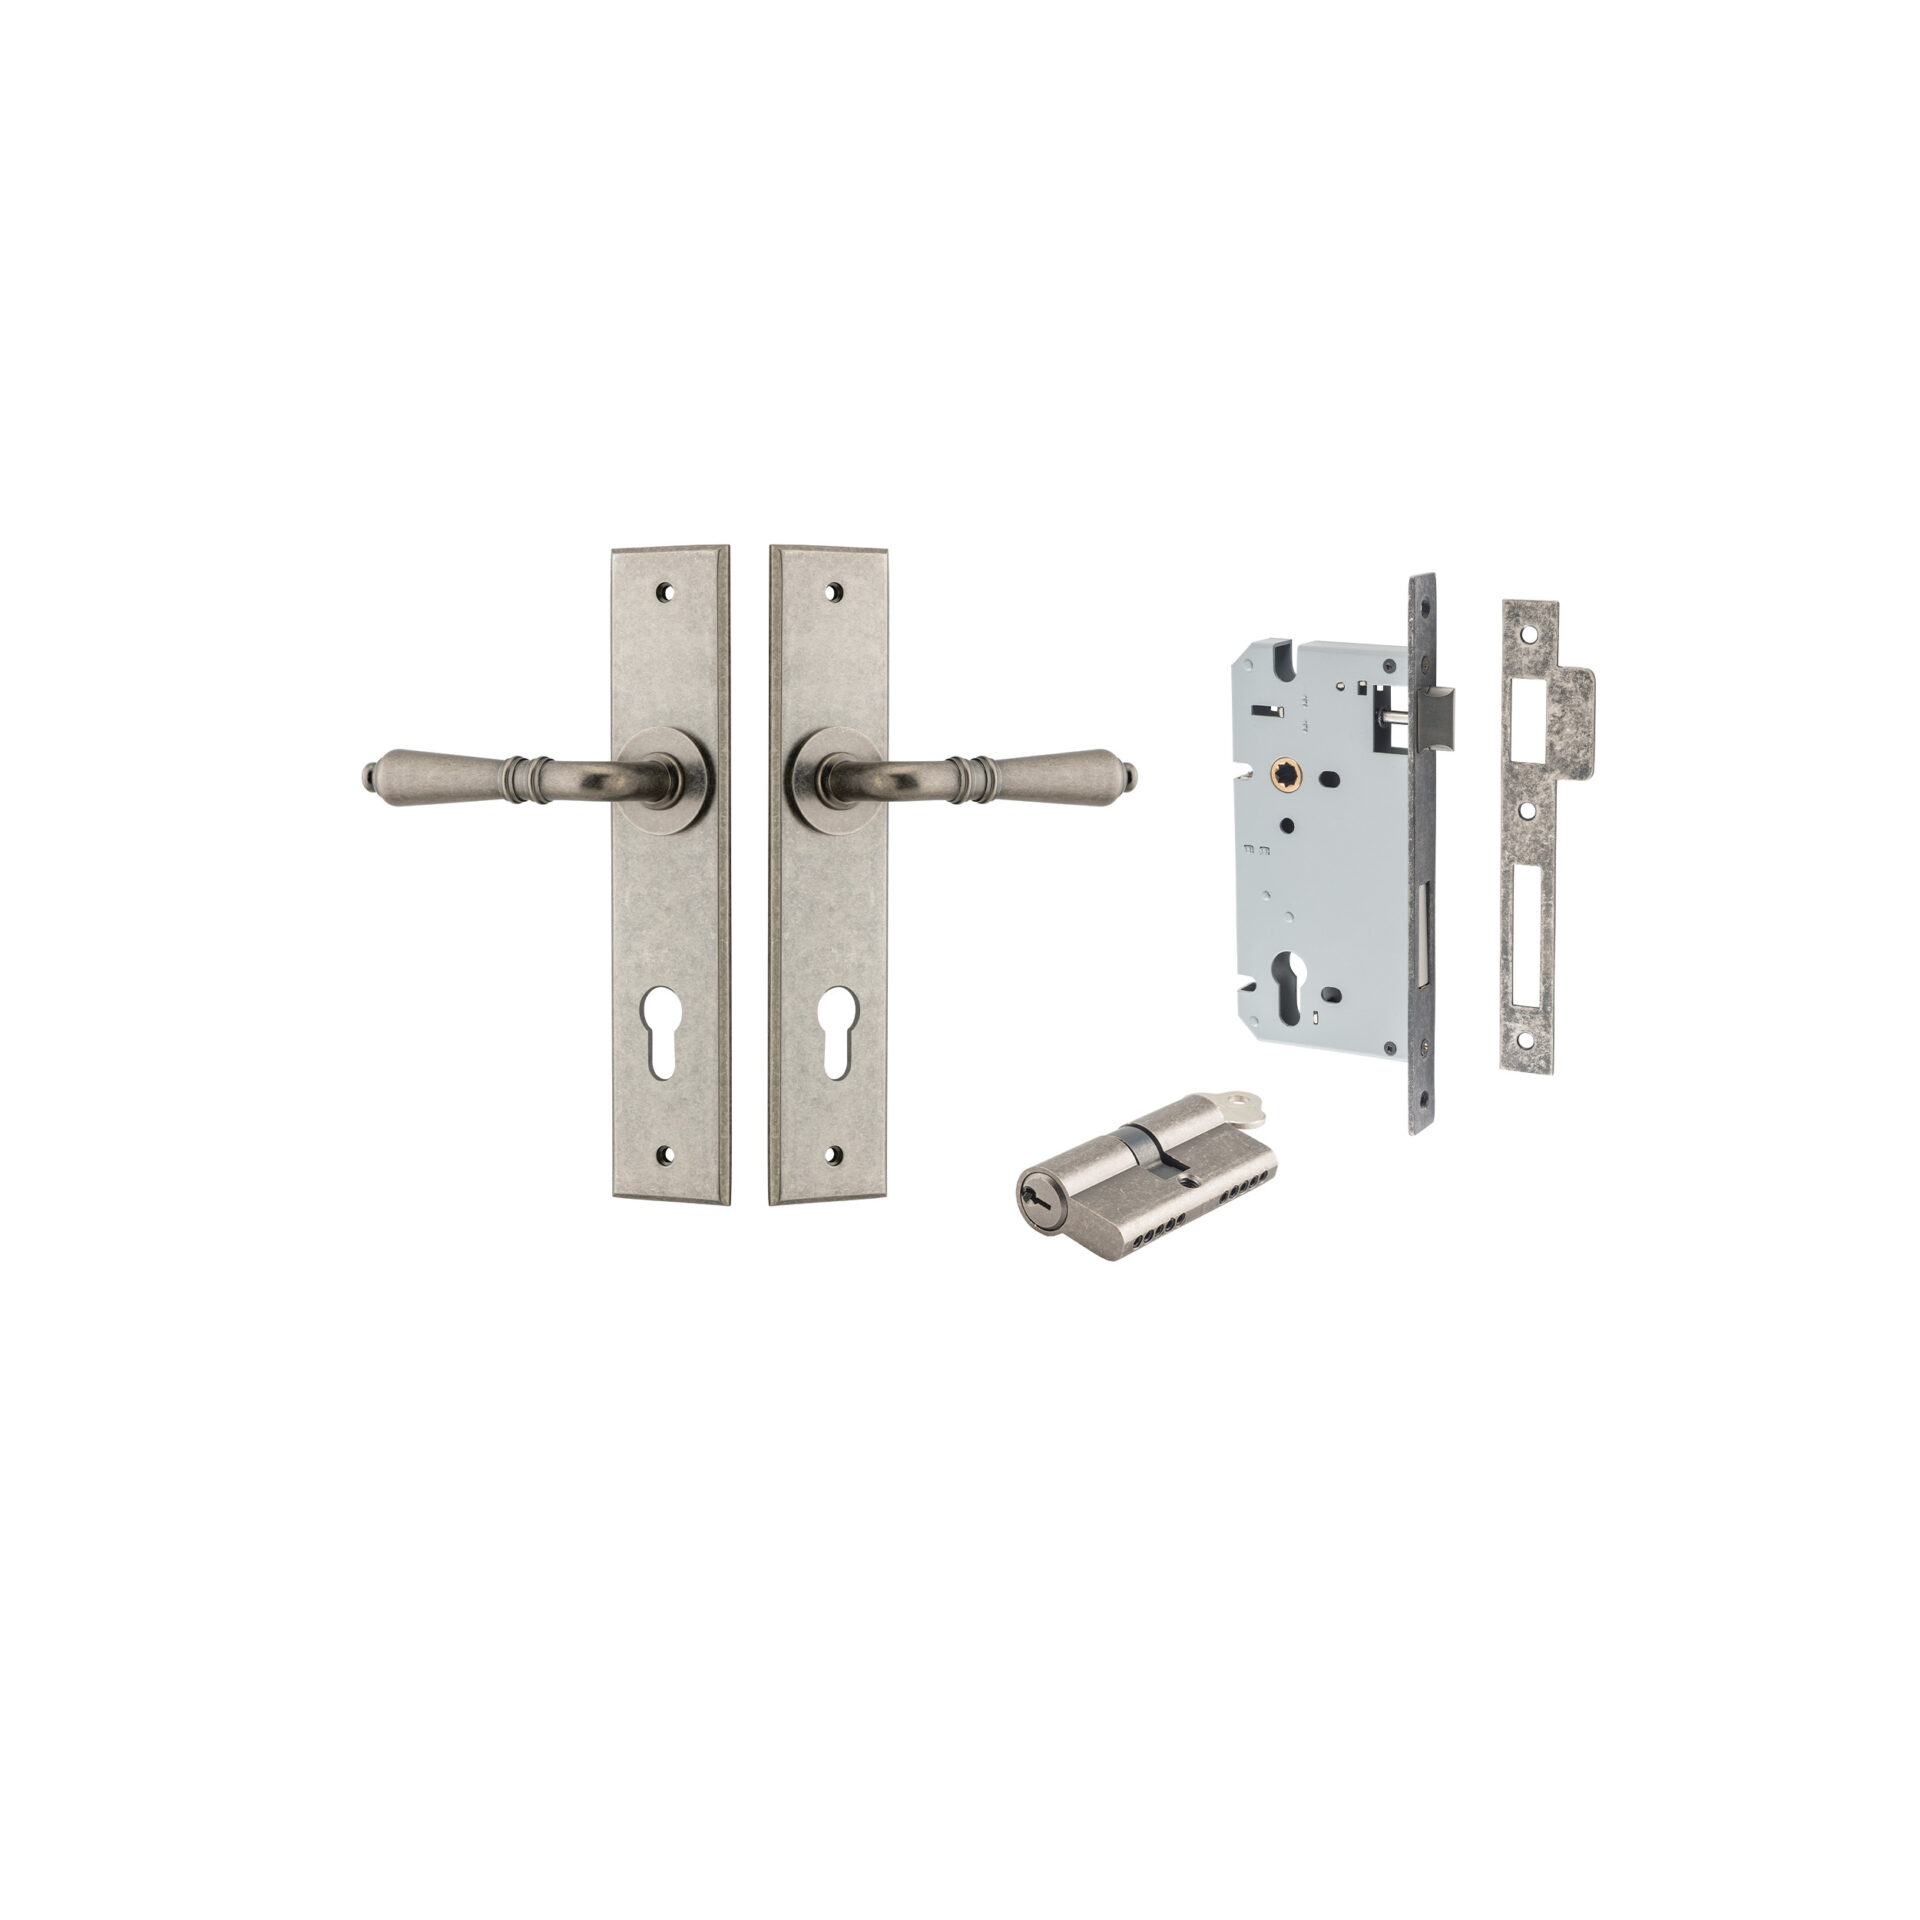 13780KENTR60KK - Sarlat Lever - Chamfered Backplate Entrance Kit with High Security Lock - Distressed Nickel - Entrance